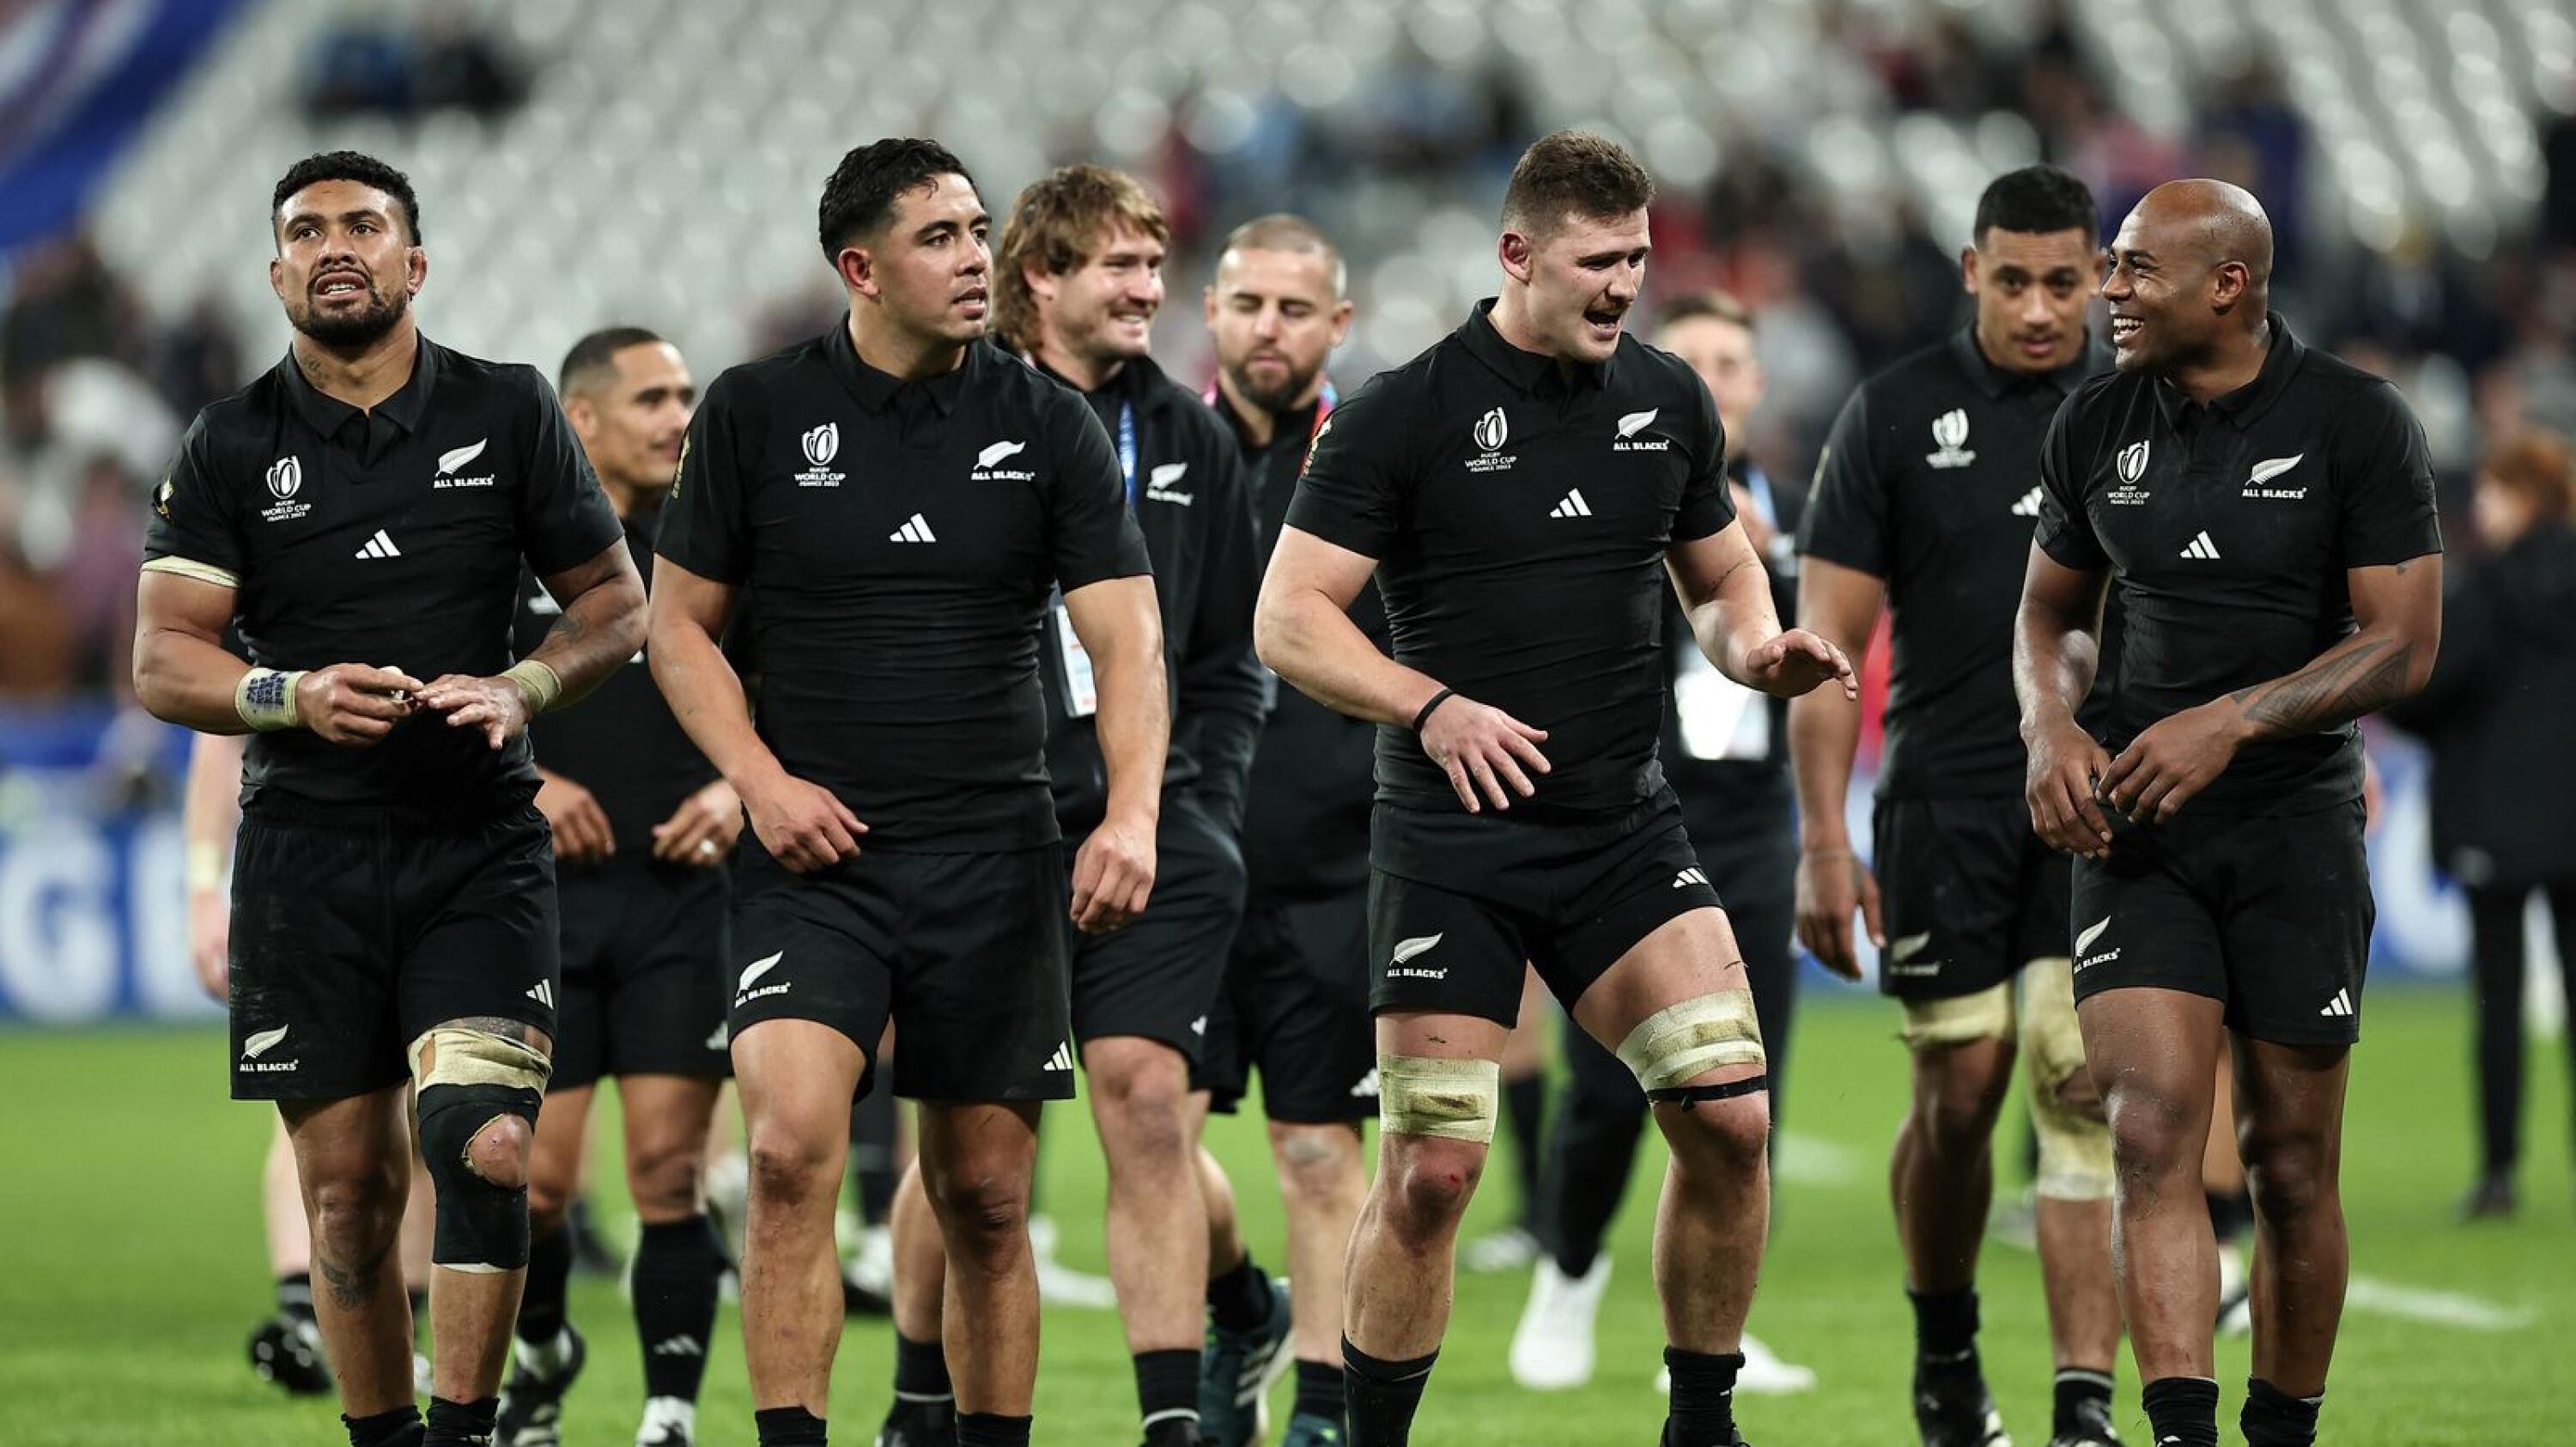 All Blacks players celebrate their Rugby World Cup semi-final victory over Argentina